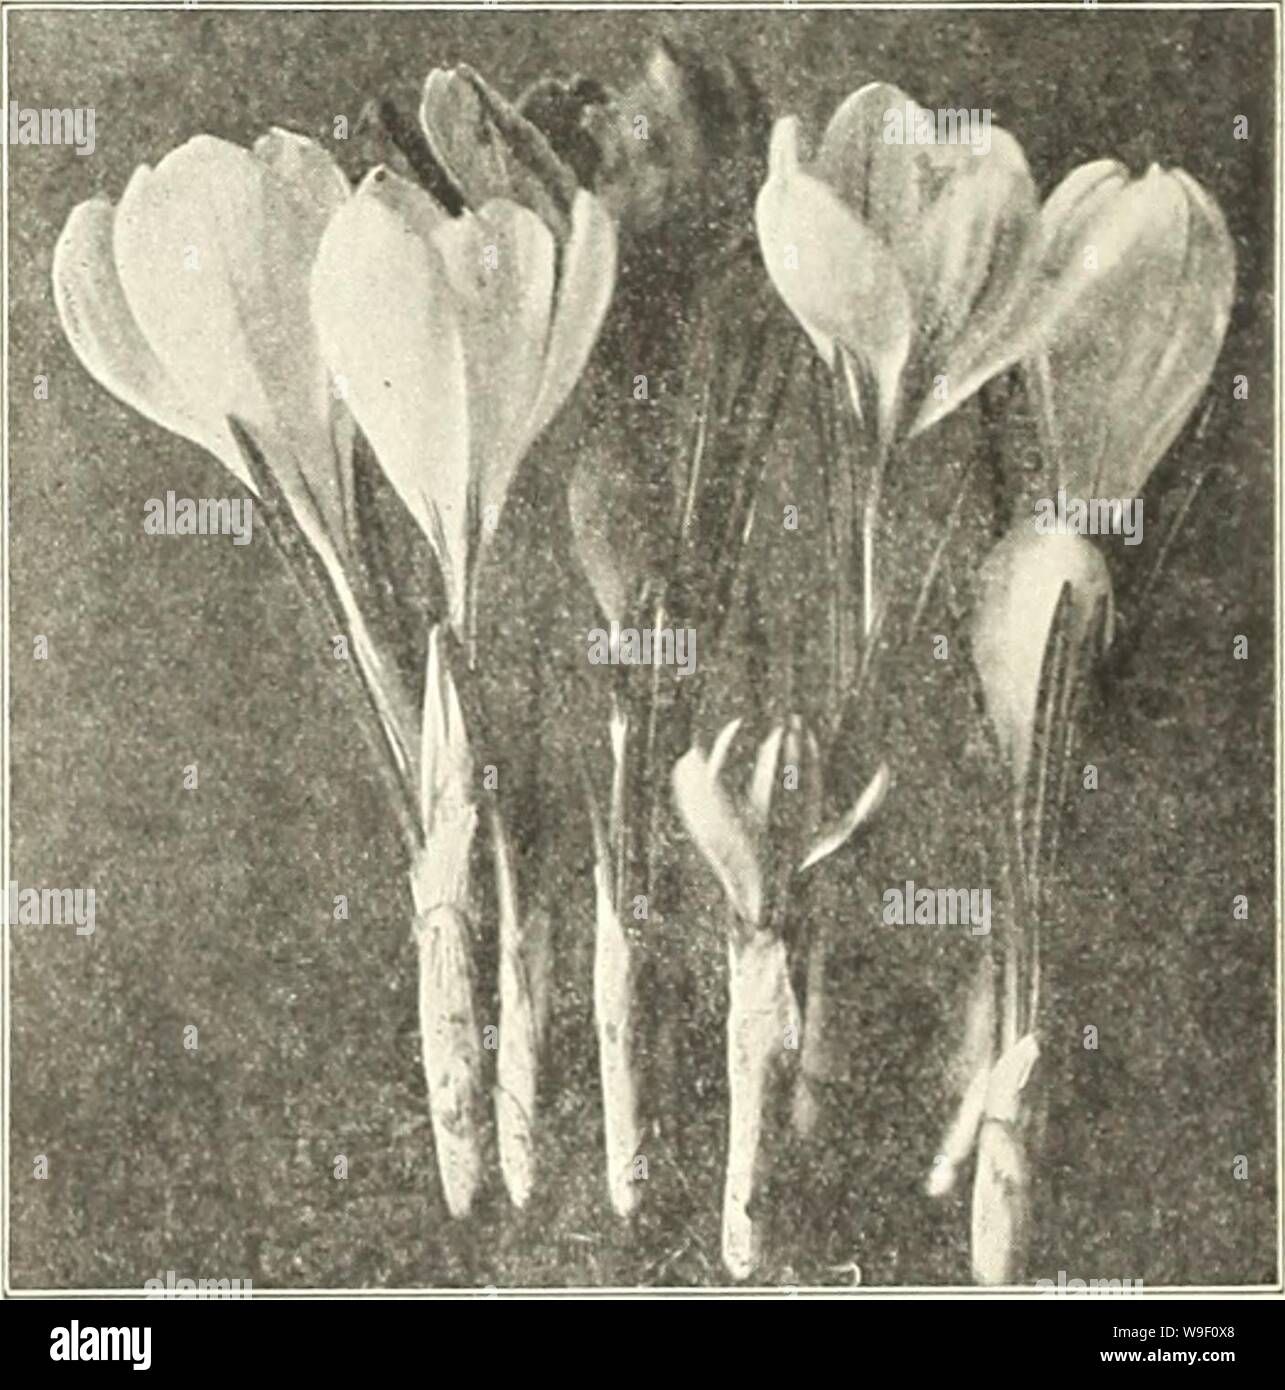 Archive image from page 7 of Currie's bulbs and plants . Currie's bulbs and plants : autumn 1919  curriesbulbsplan19curr 0 Year: 1919 ( Uouiilc Tulip Conronne D'or. Parrot Tulips Parrot tulips, so called because of.their brilliant, parrot-like Coloring, are large, fantastically showy flowers with curled and crested petals. They come into bloom' about the middle of May and remain in bloom for a long time. Each Admiral ConstantinopleâRed $ .05 CramoiHlc BrilliantâDeep crimson, with large, black, star-shaped â r 0.' i.utc:i Vellow 05 Porfcotn yellow and scarlet 0.' Finest Mixed All colors 04 Doz. Stock Photo